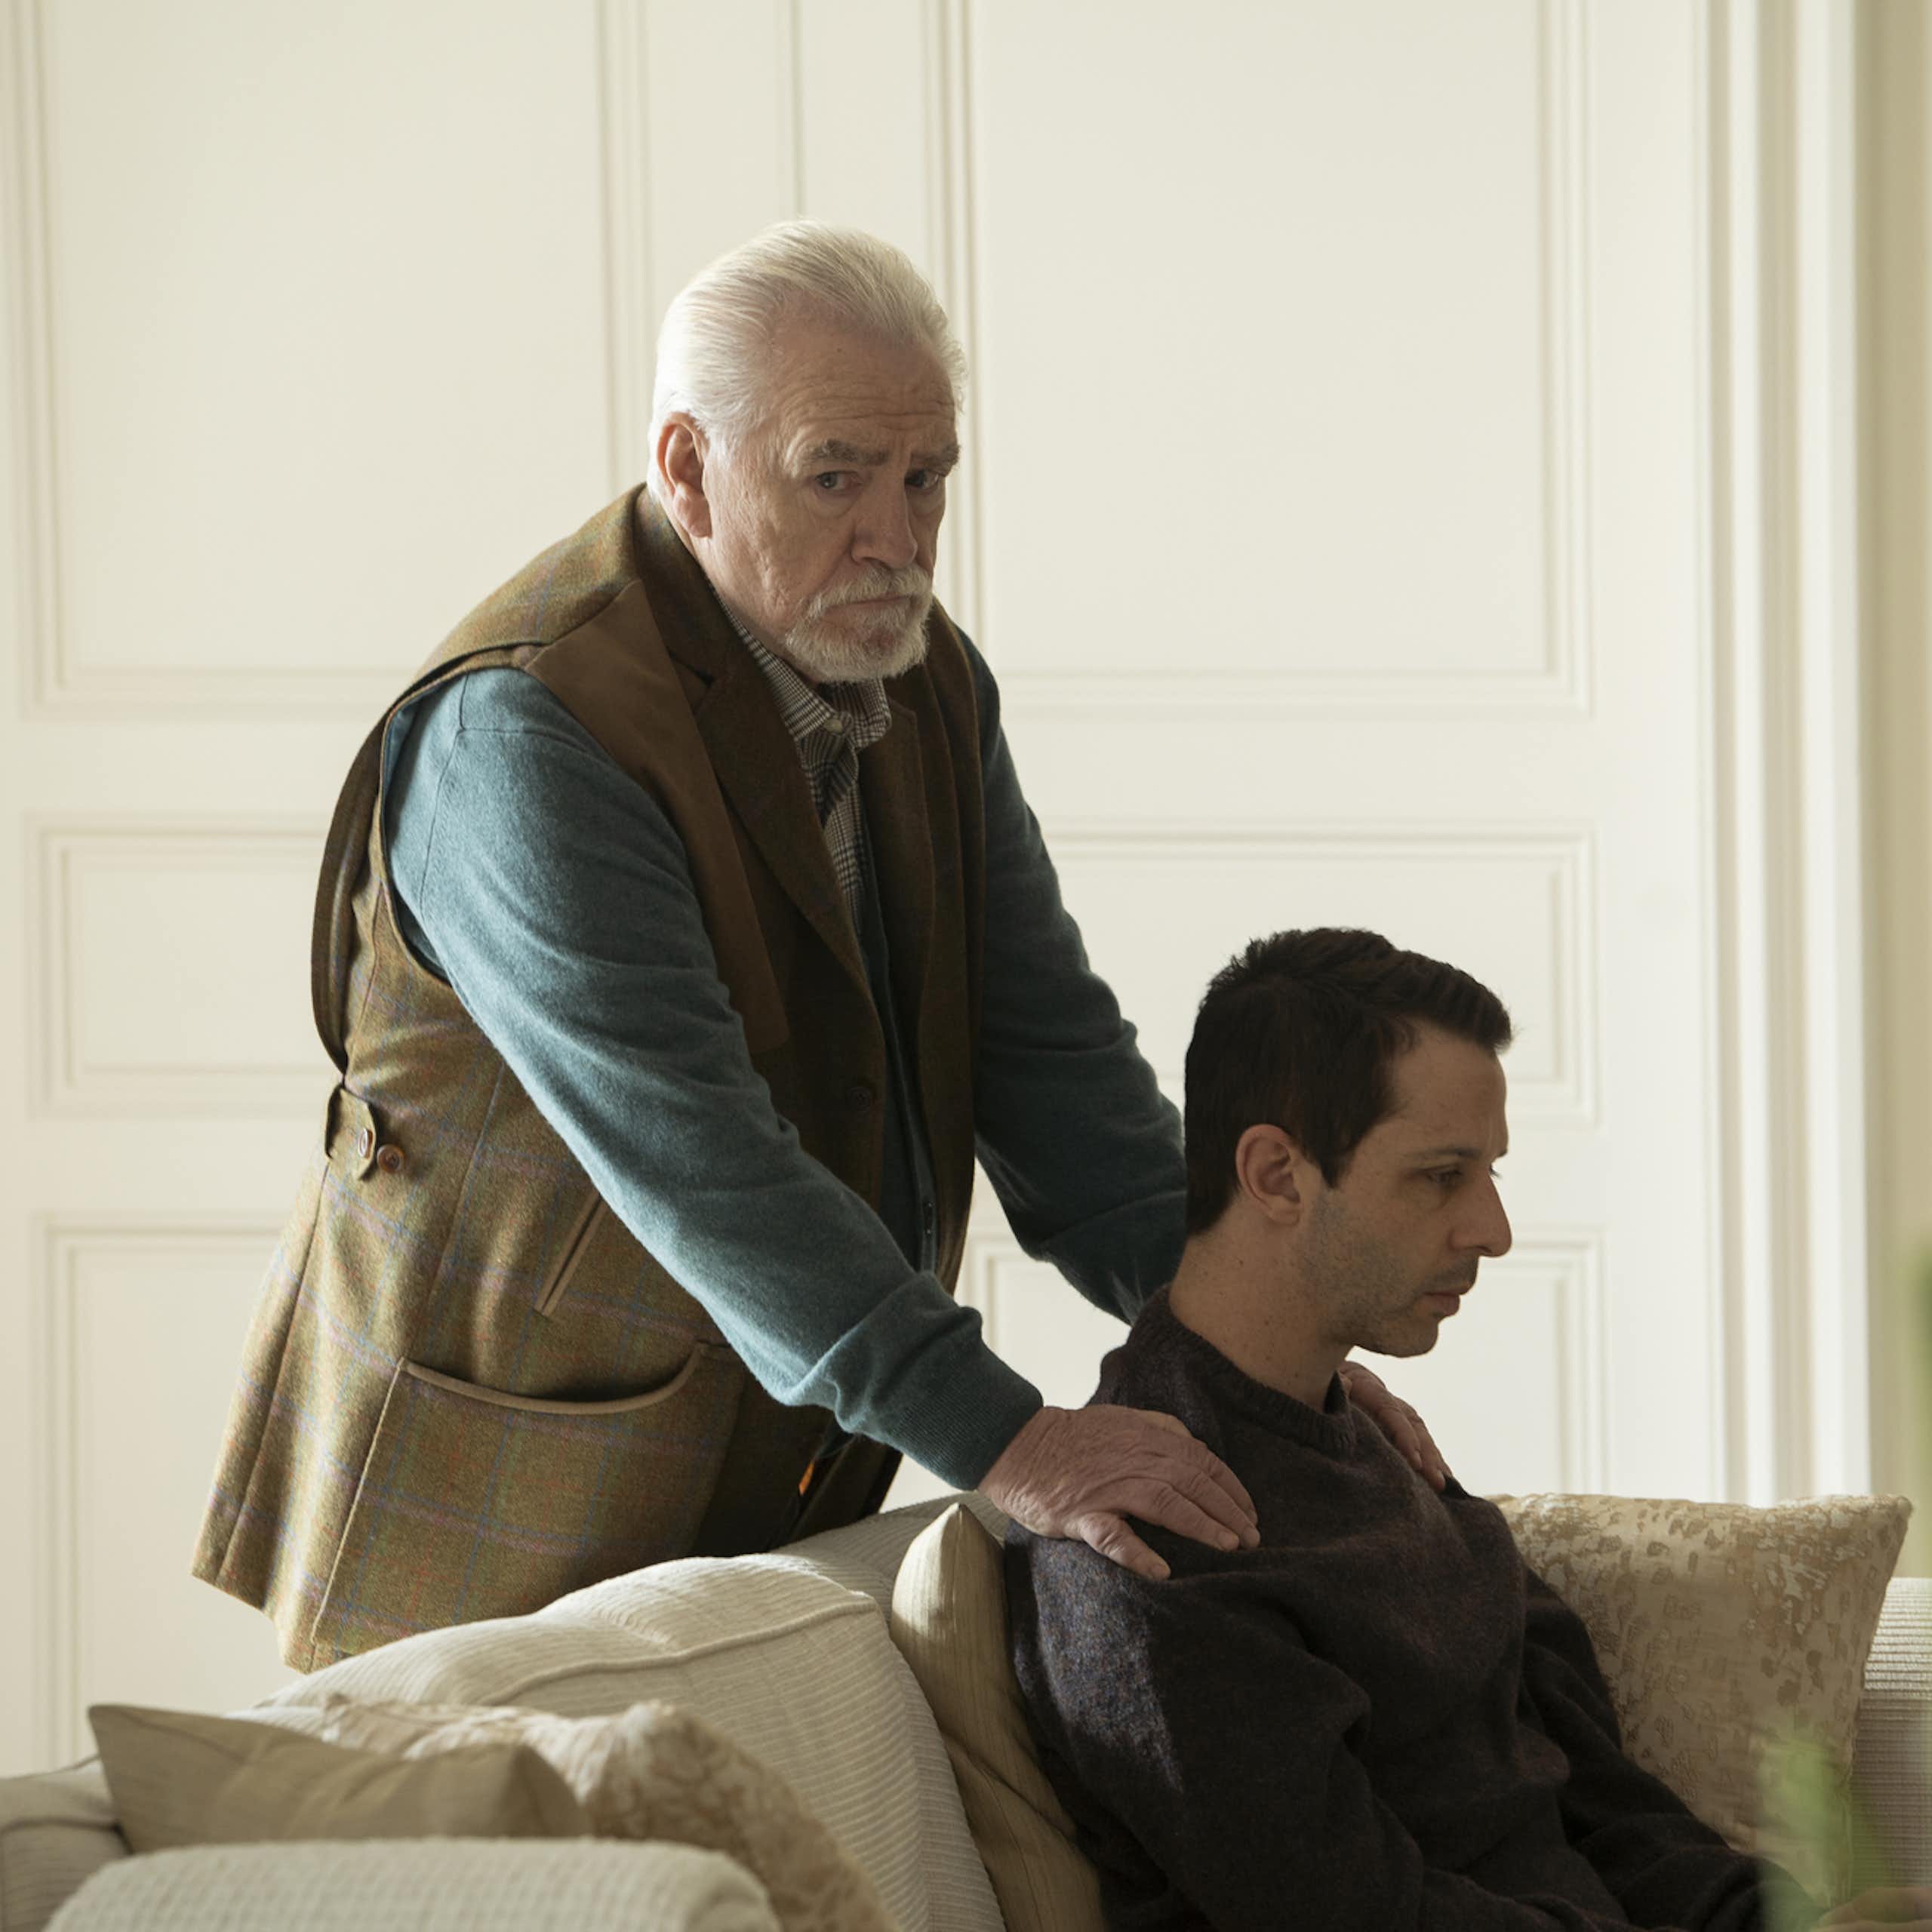 In a still from the HBO Series "Succession," patriarch Logan Roy, played by Brian Cox, is seen rubbing the shoulders of his son and heir apparent. Despite the seemingly affectionate gesture, the elder Roy looks off into the distance with a look of concern.